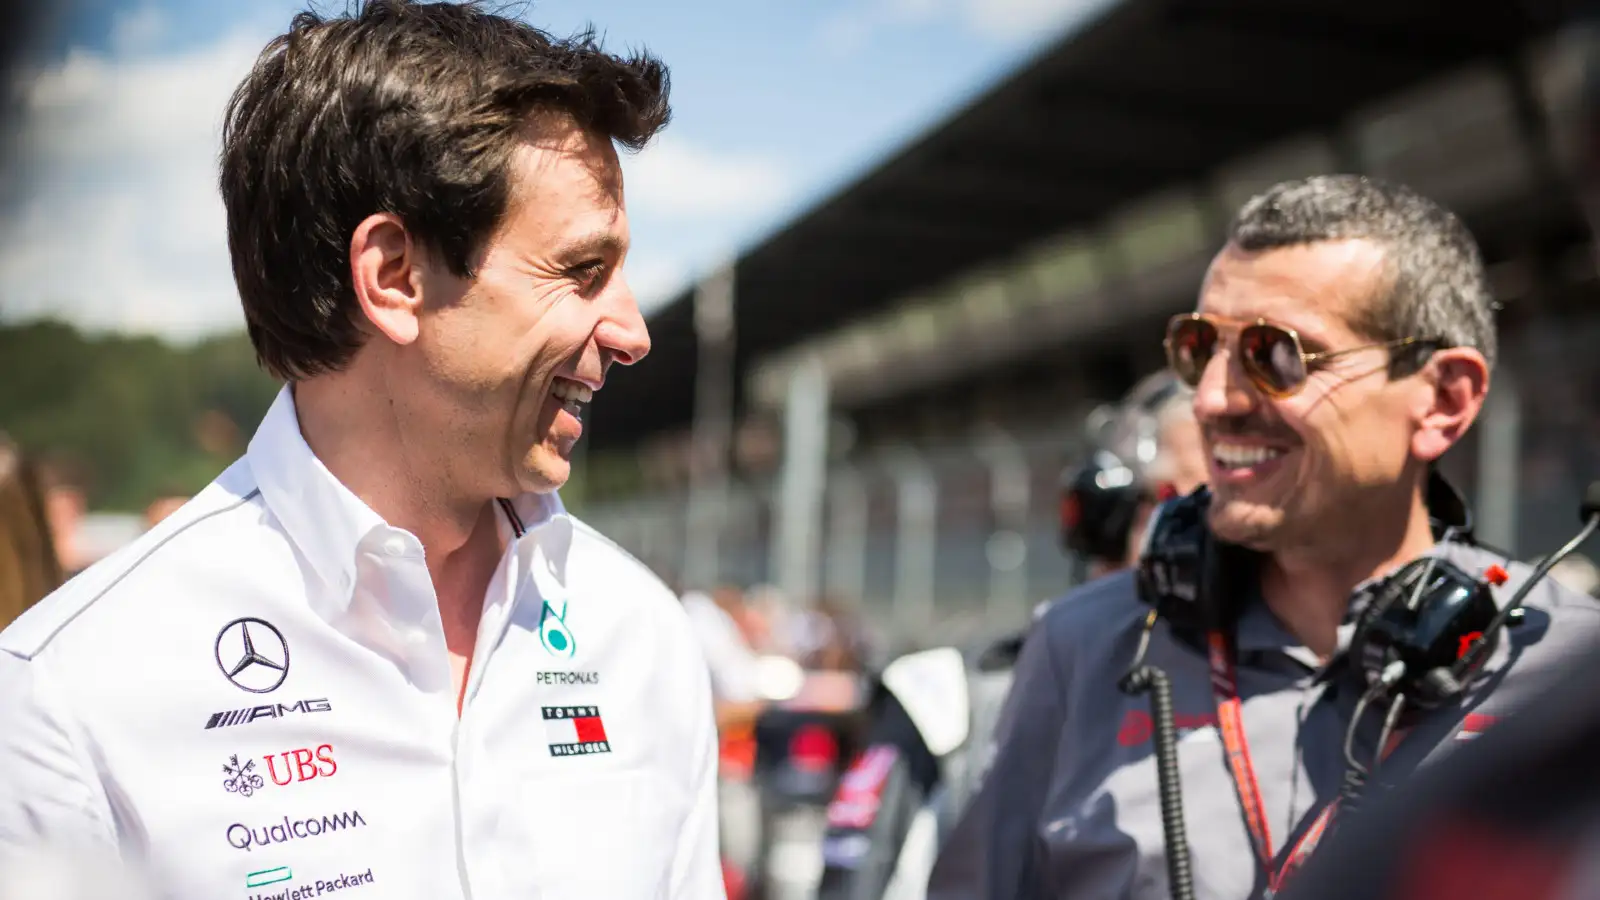 Toto Wolff and Guenther Steiner on the grid at the 2018 Austrian Grand Prix.